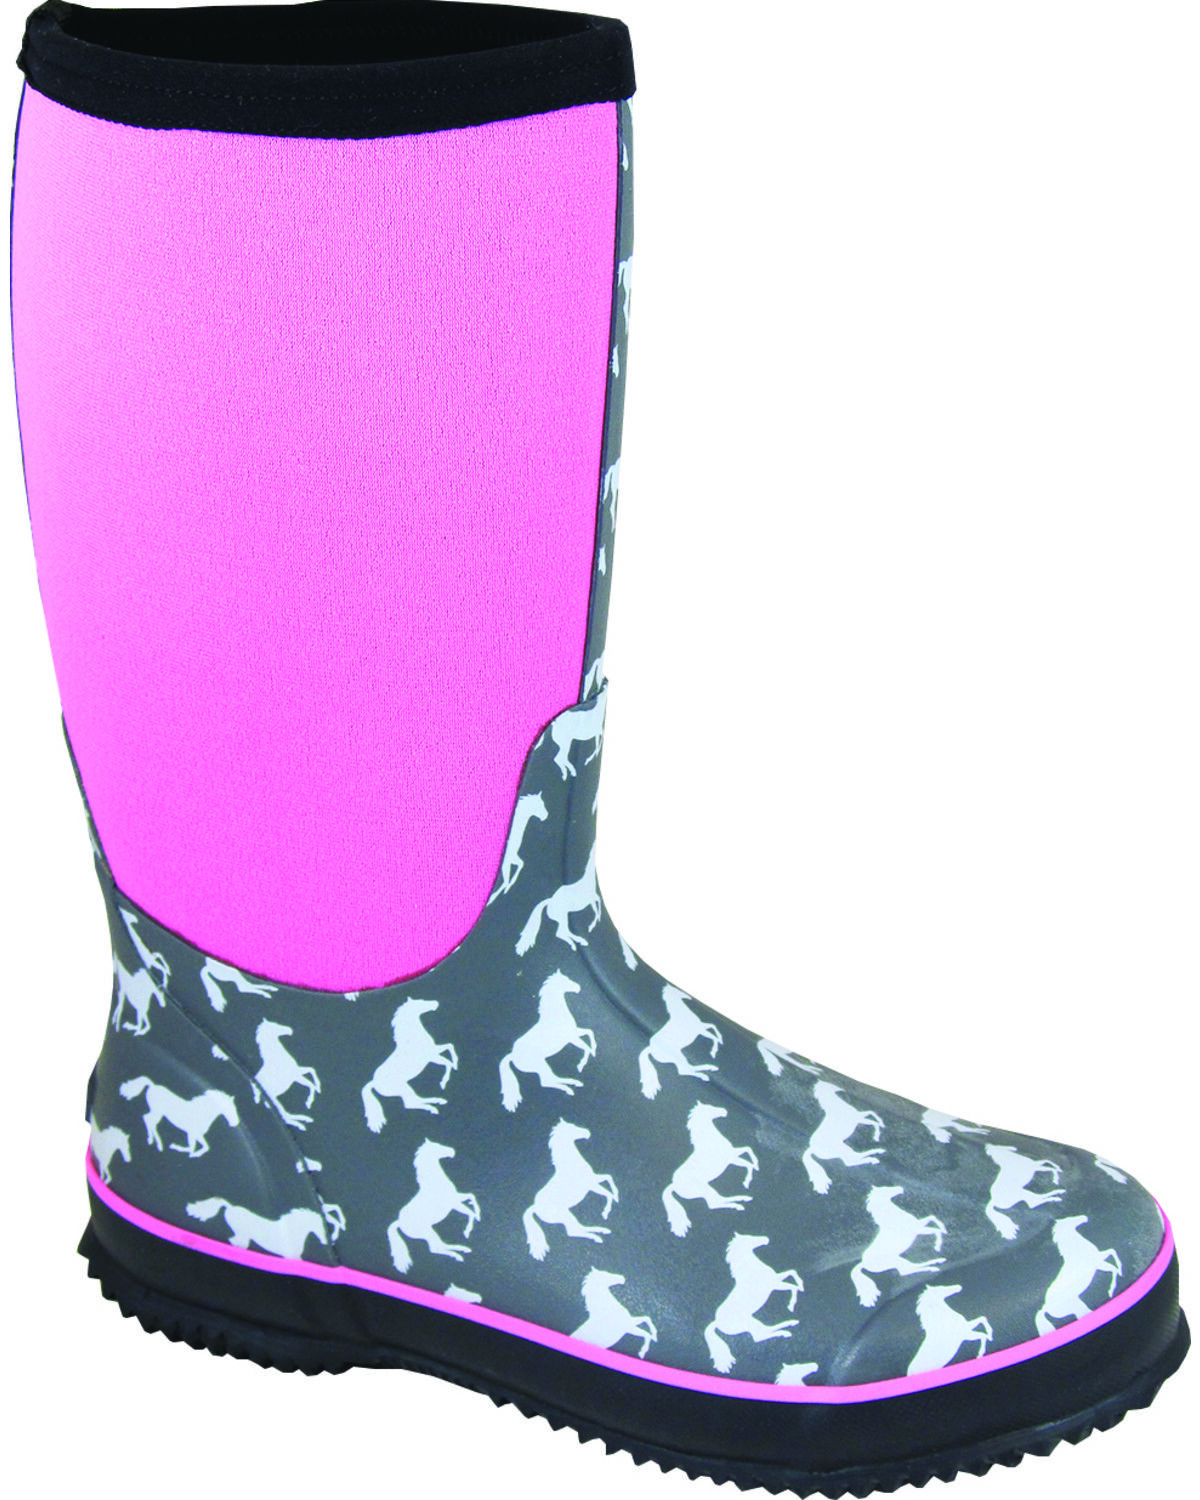 women's rain boots with horses on them